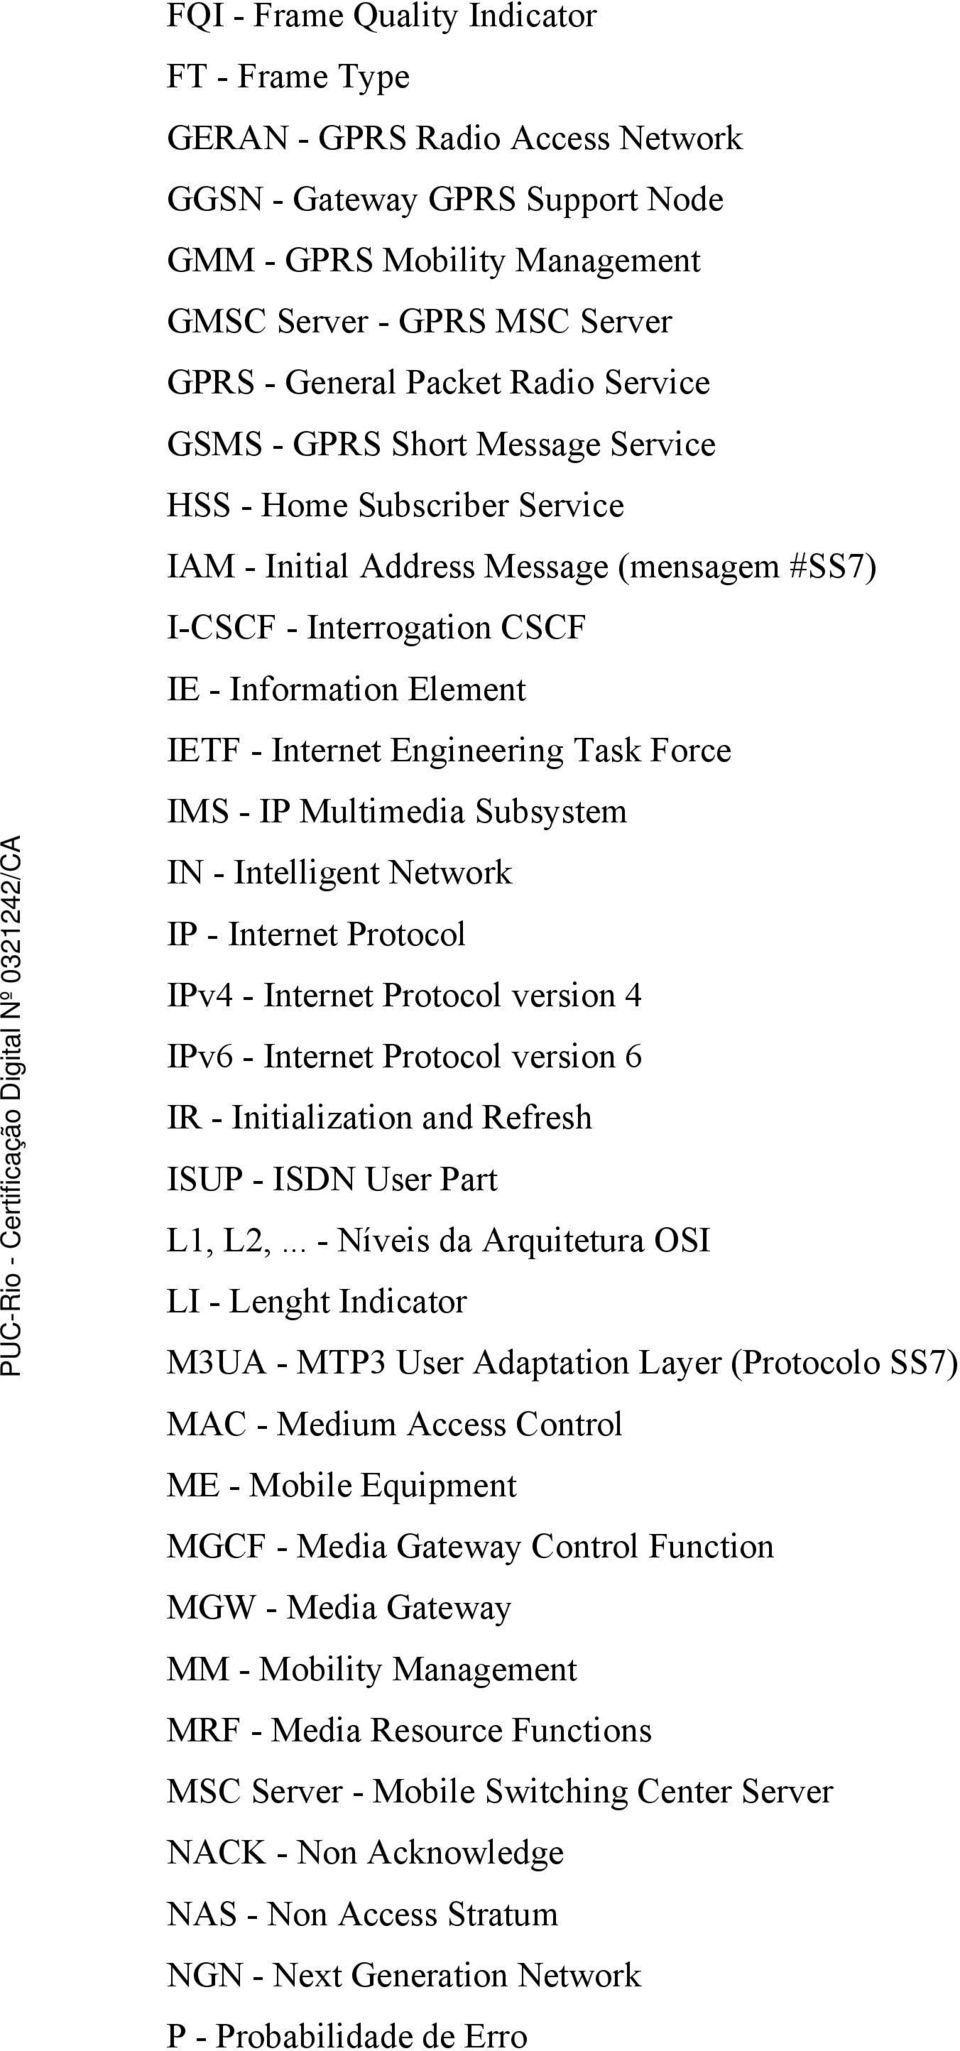 Engineering Task Force IMS - IP Multimedia Subsystem IN - Intelligent Network IP - Internet Protocol IPv4 - Internet Protocol version 4 IPv6 - Internet Protocol version 6 IR - Initialization and